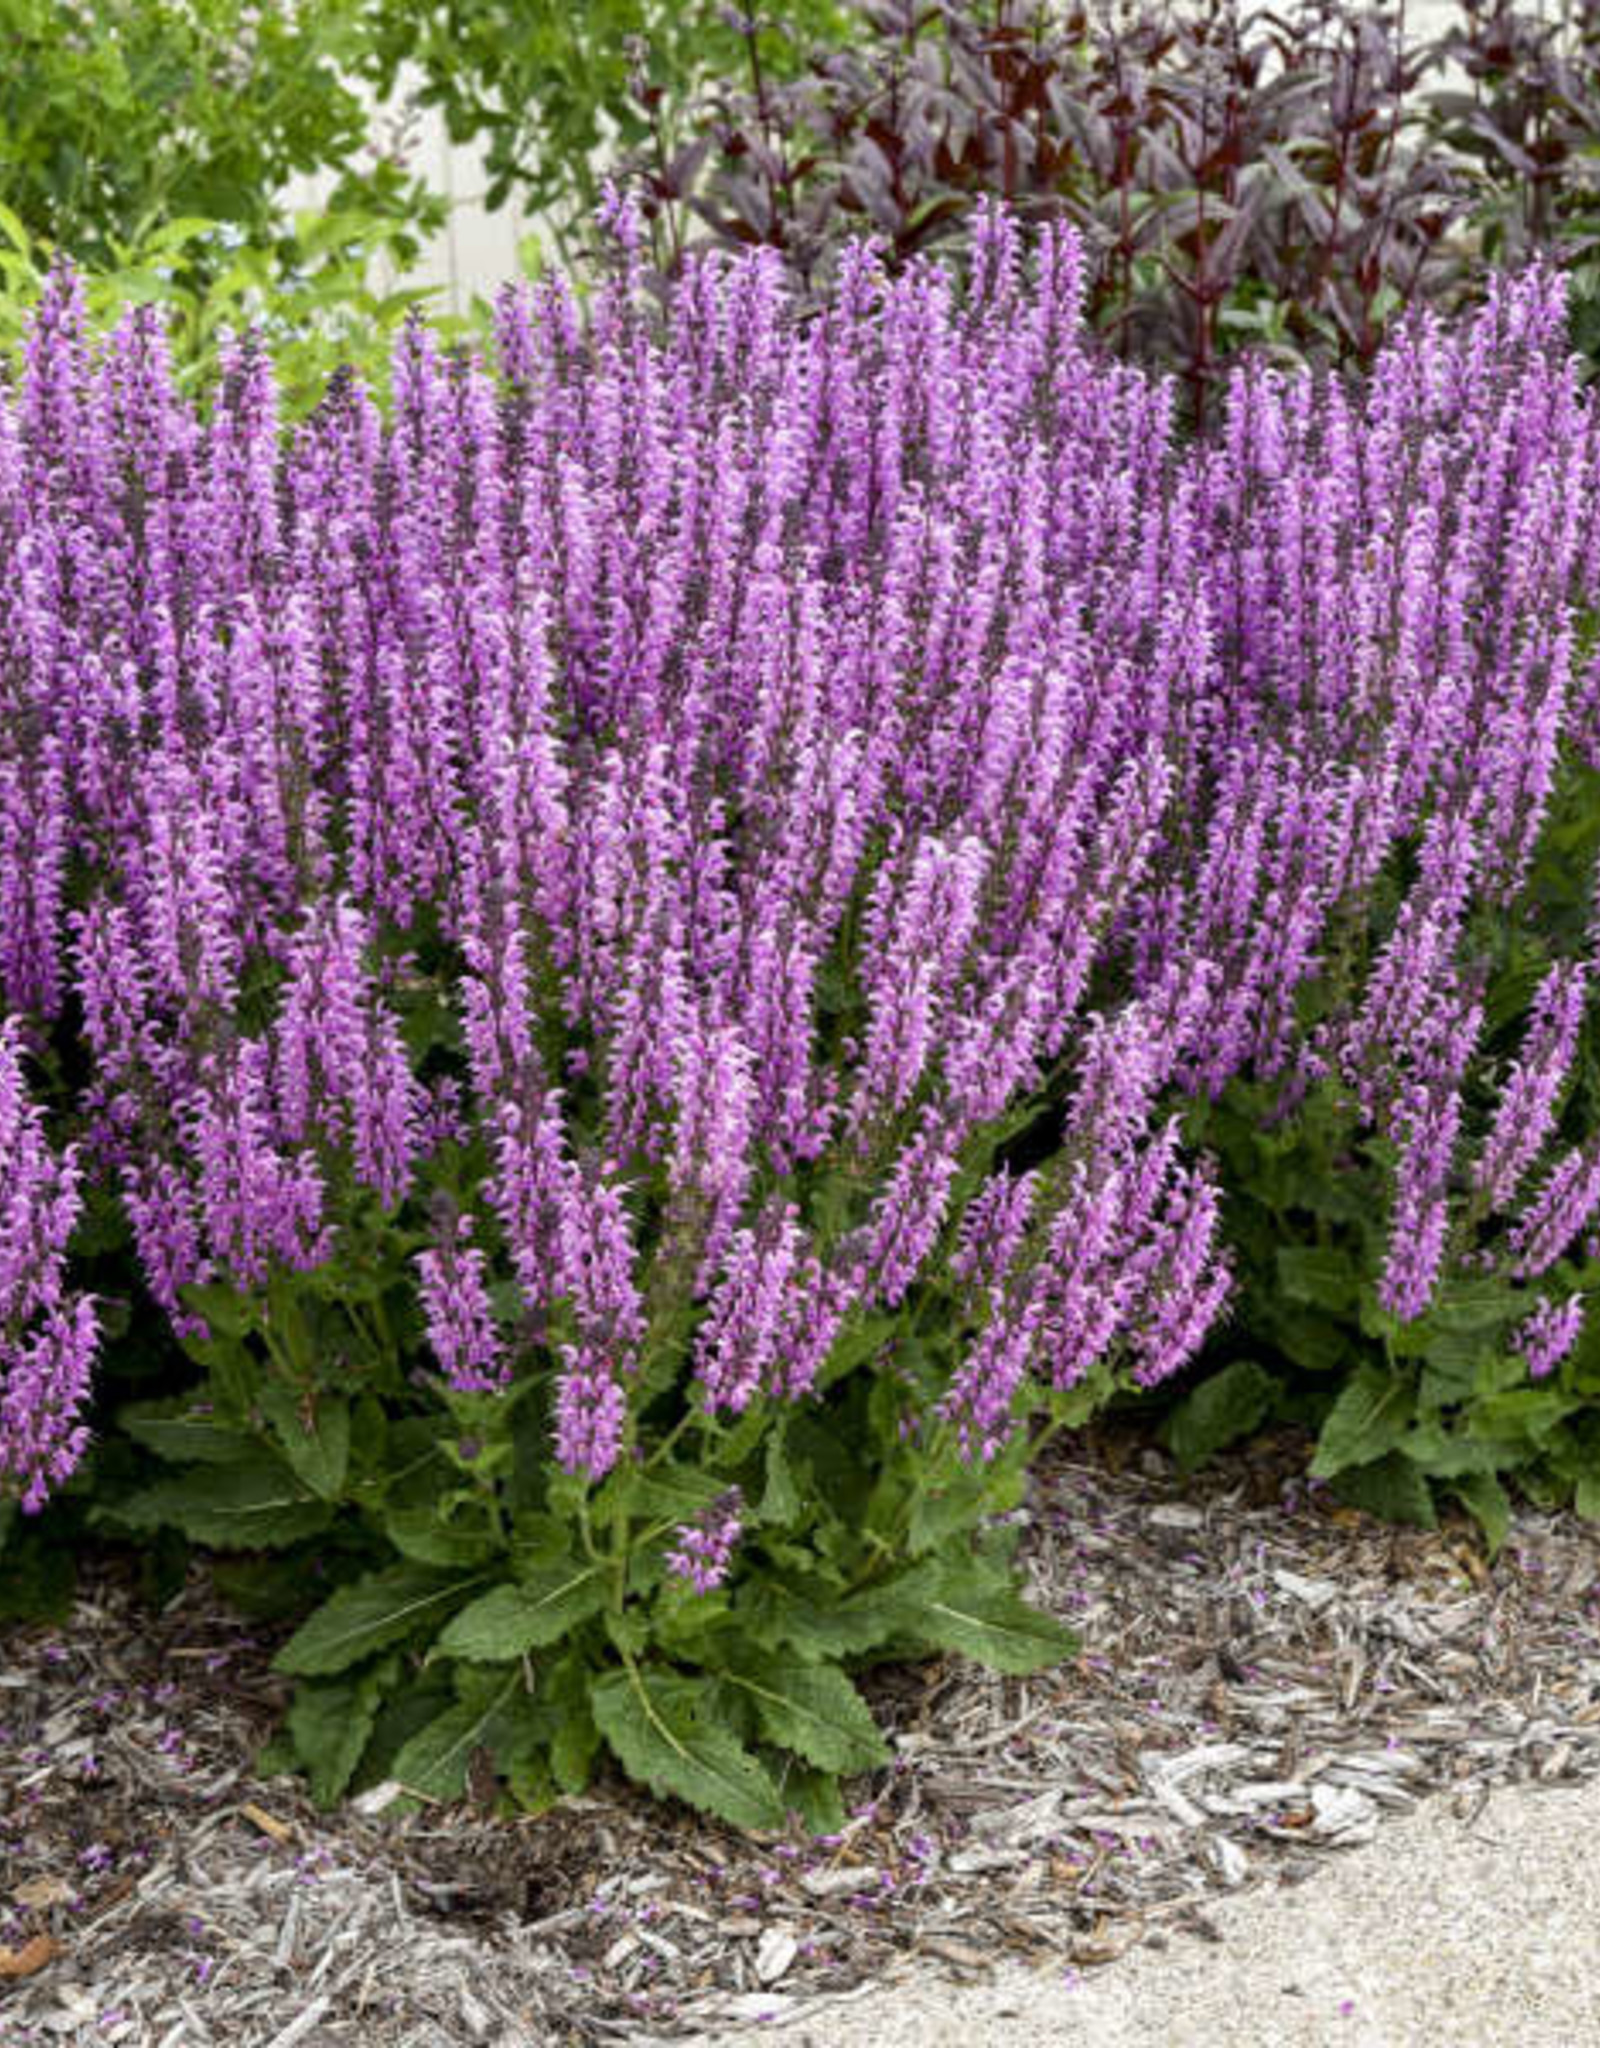 Proven Winners Salvia COLOR SPIRES 'Back to the Fuchsia' #1 PW